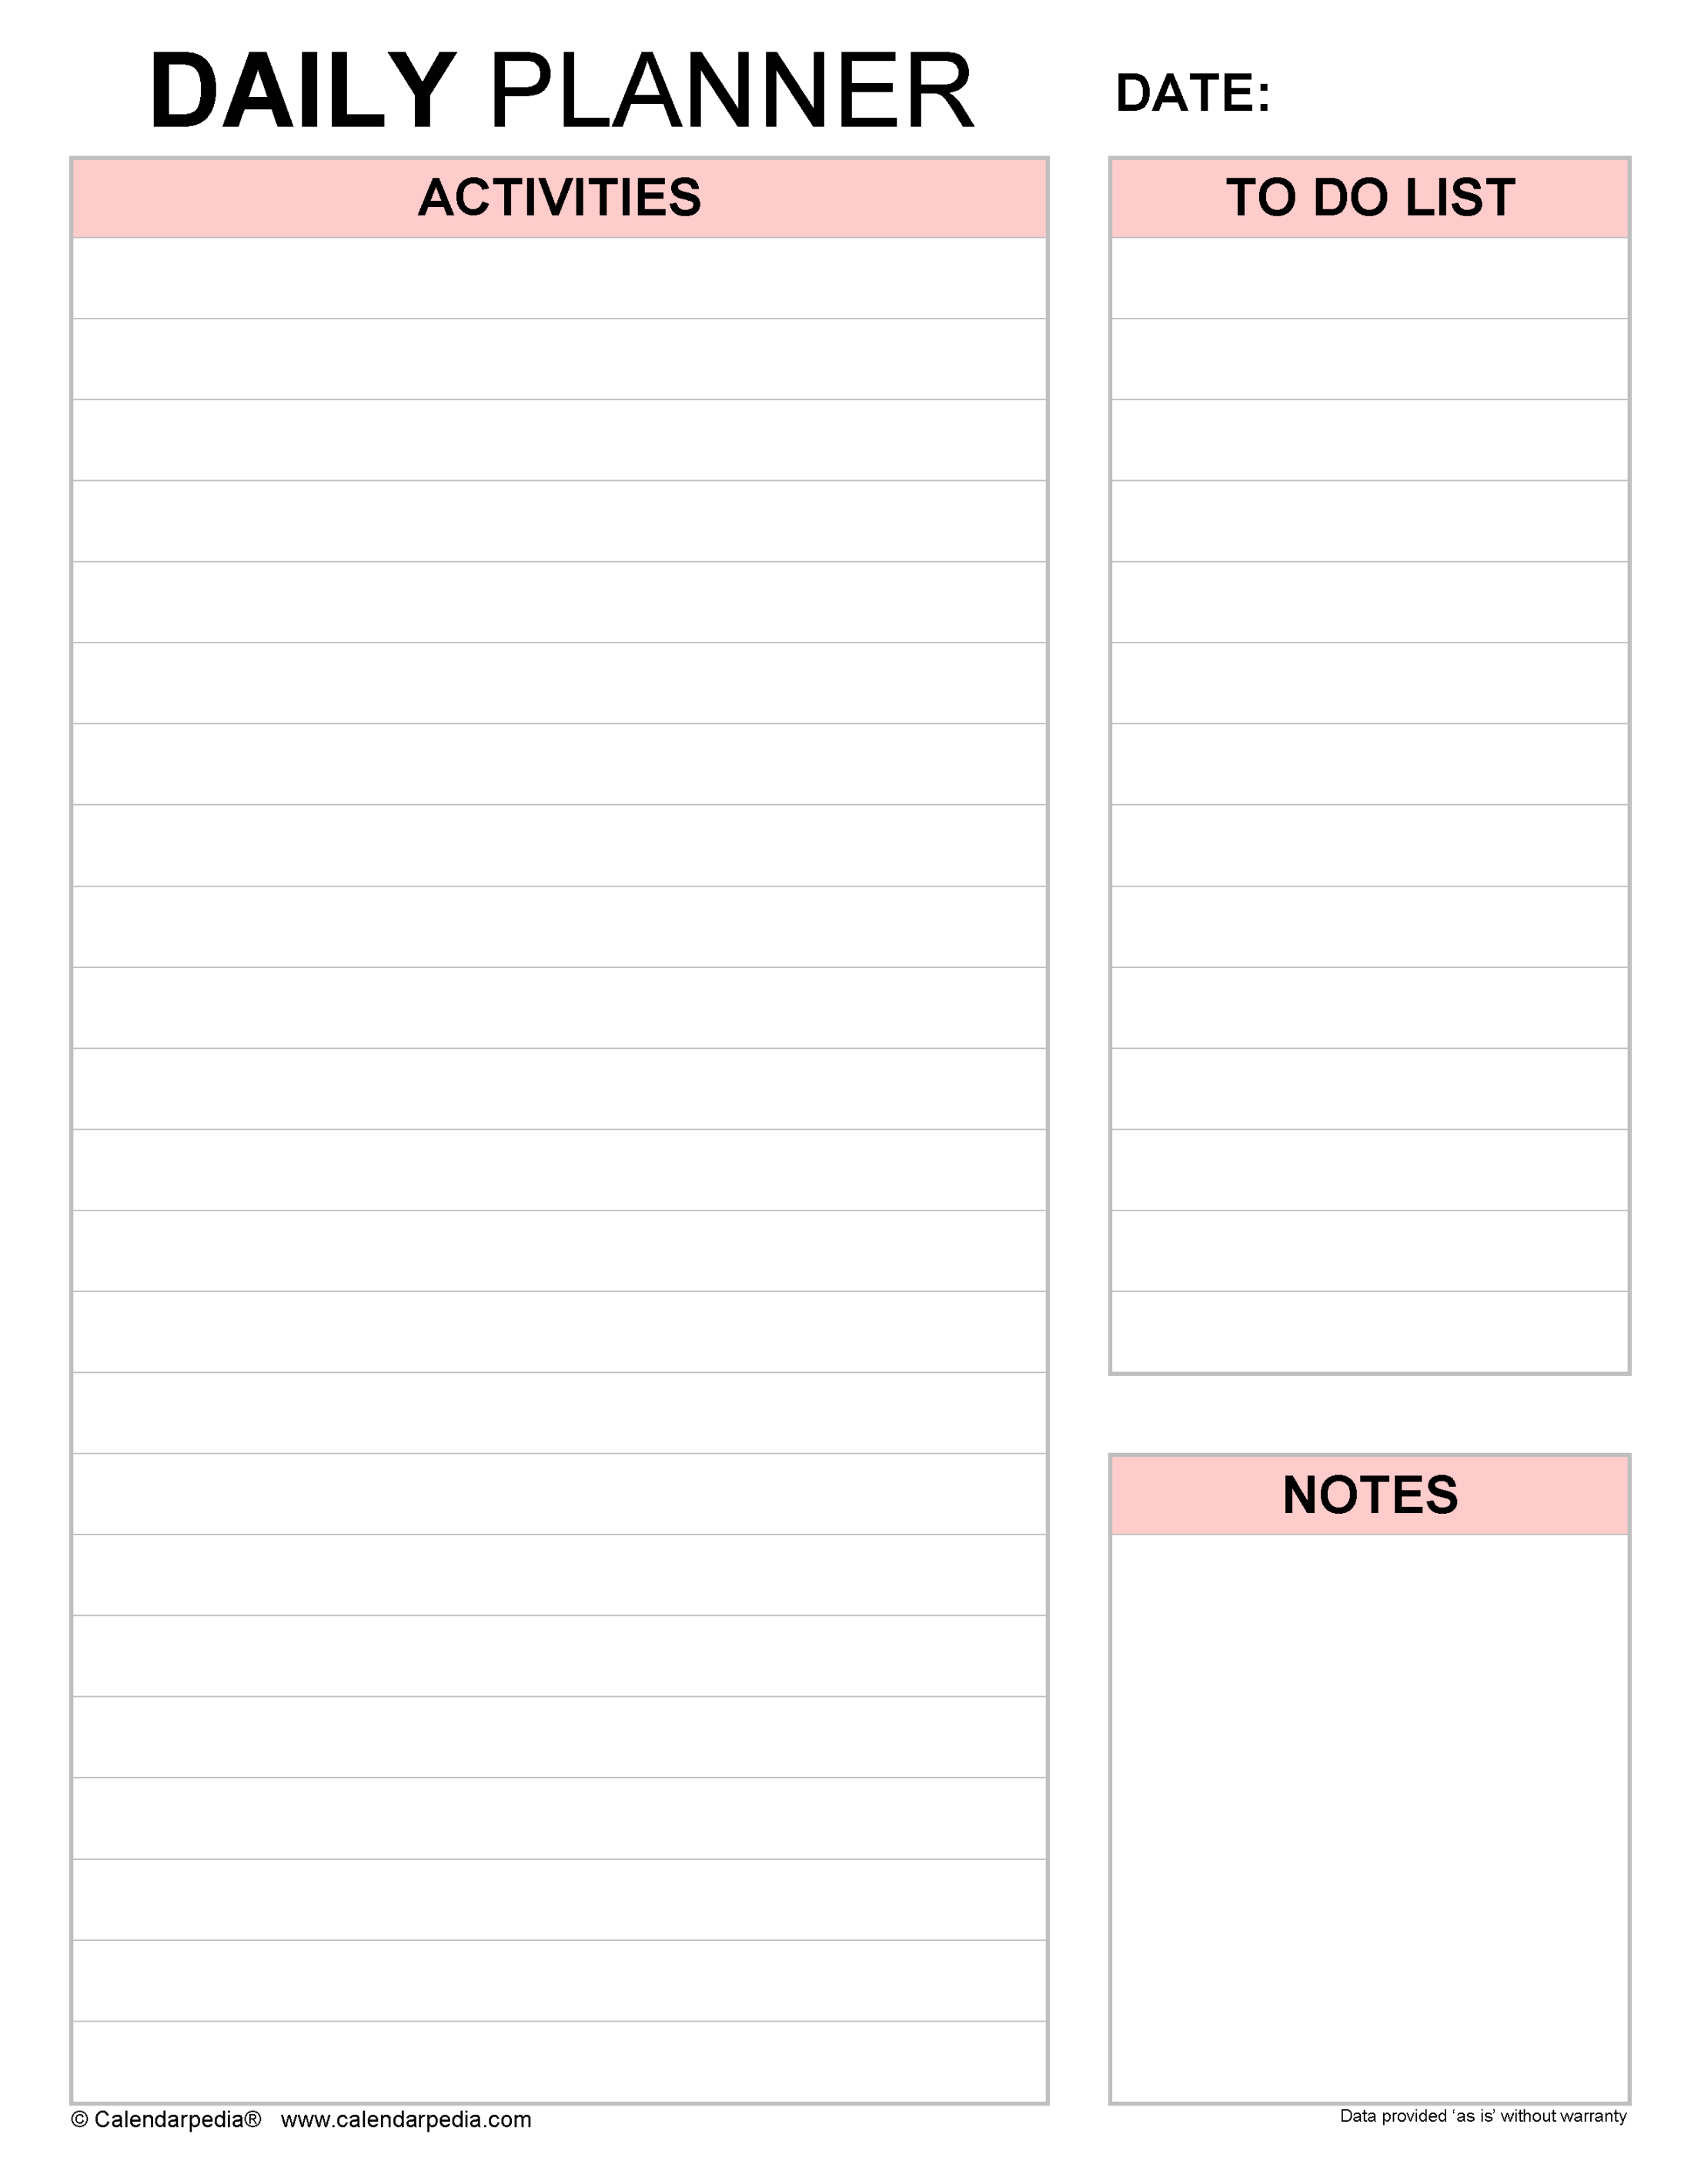 Daily Planners in Microsoft Word Format - + Templates